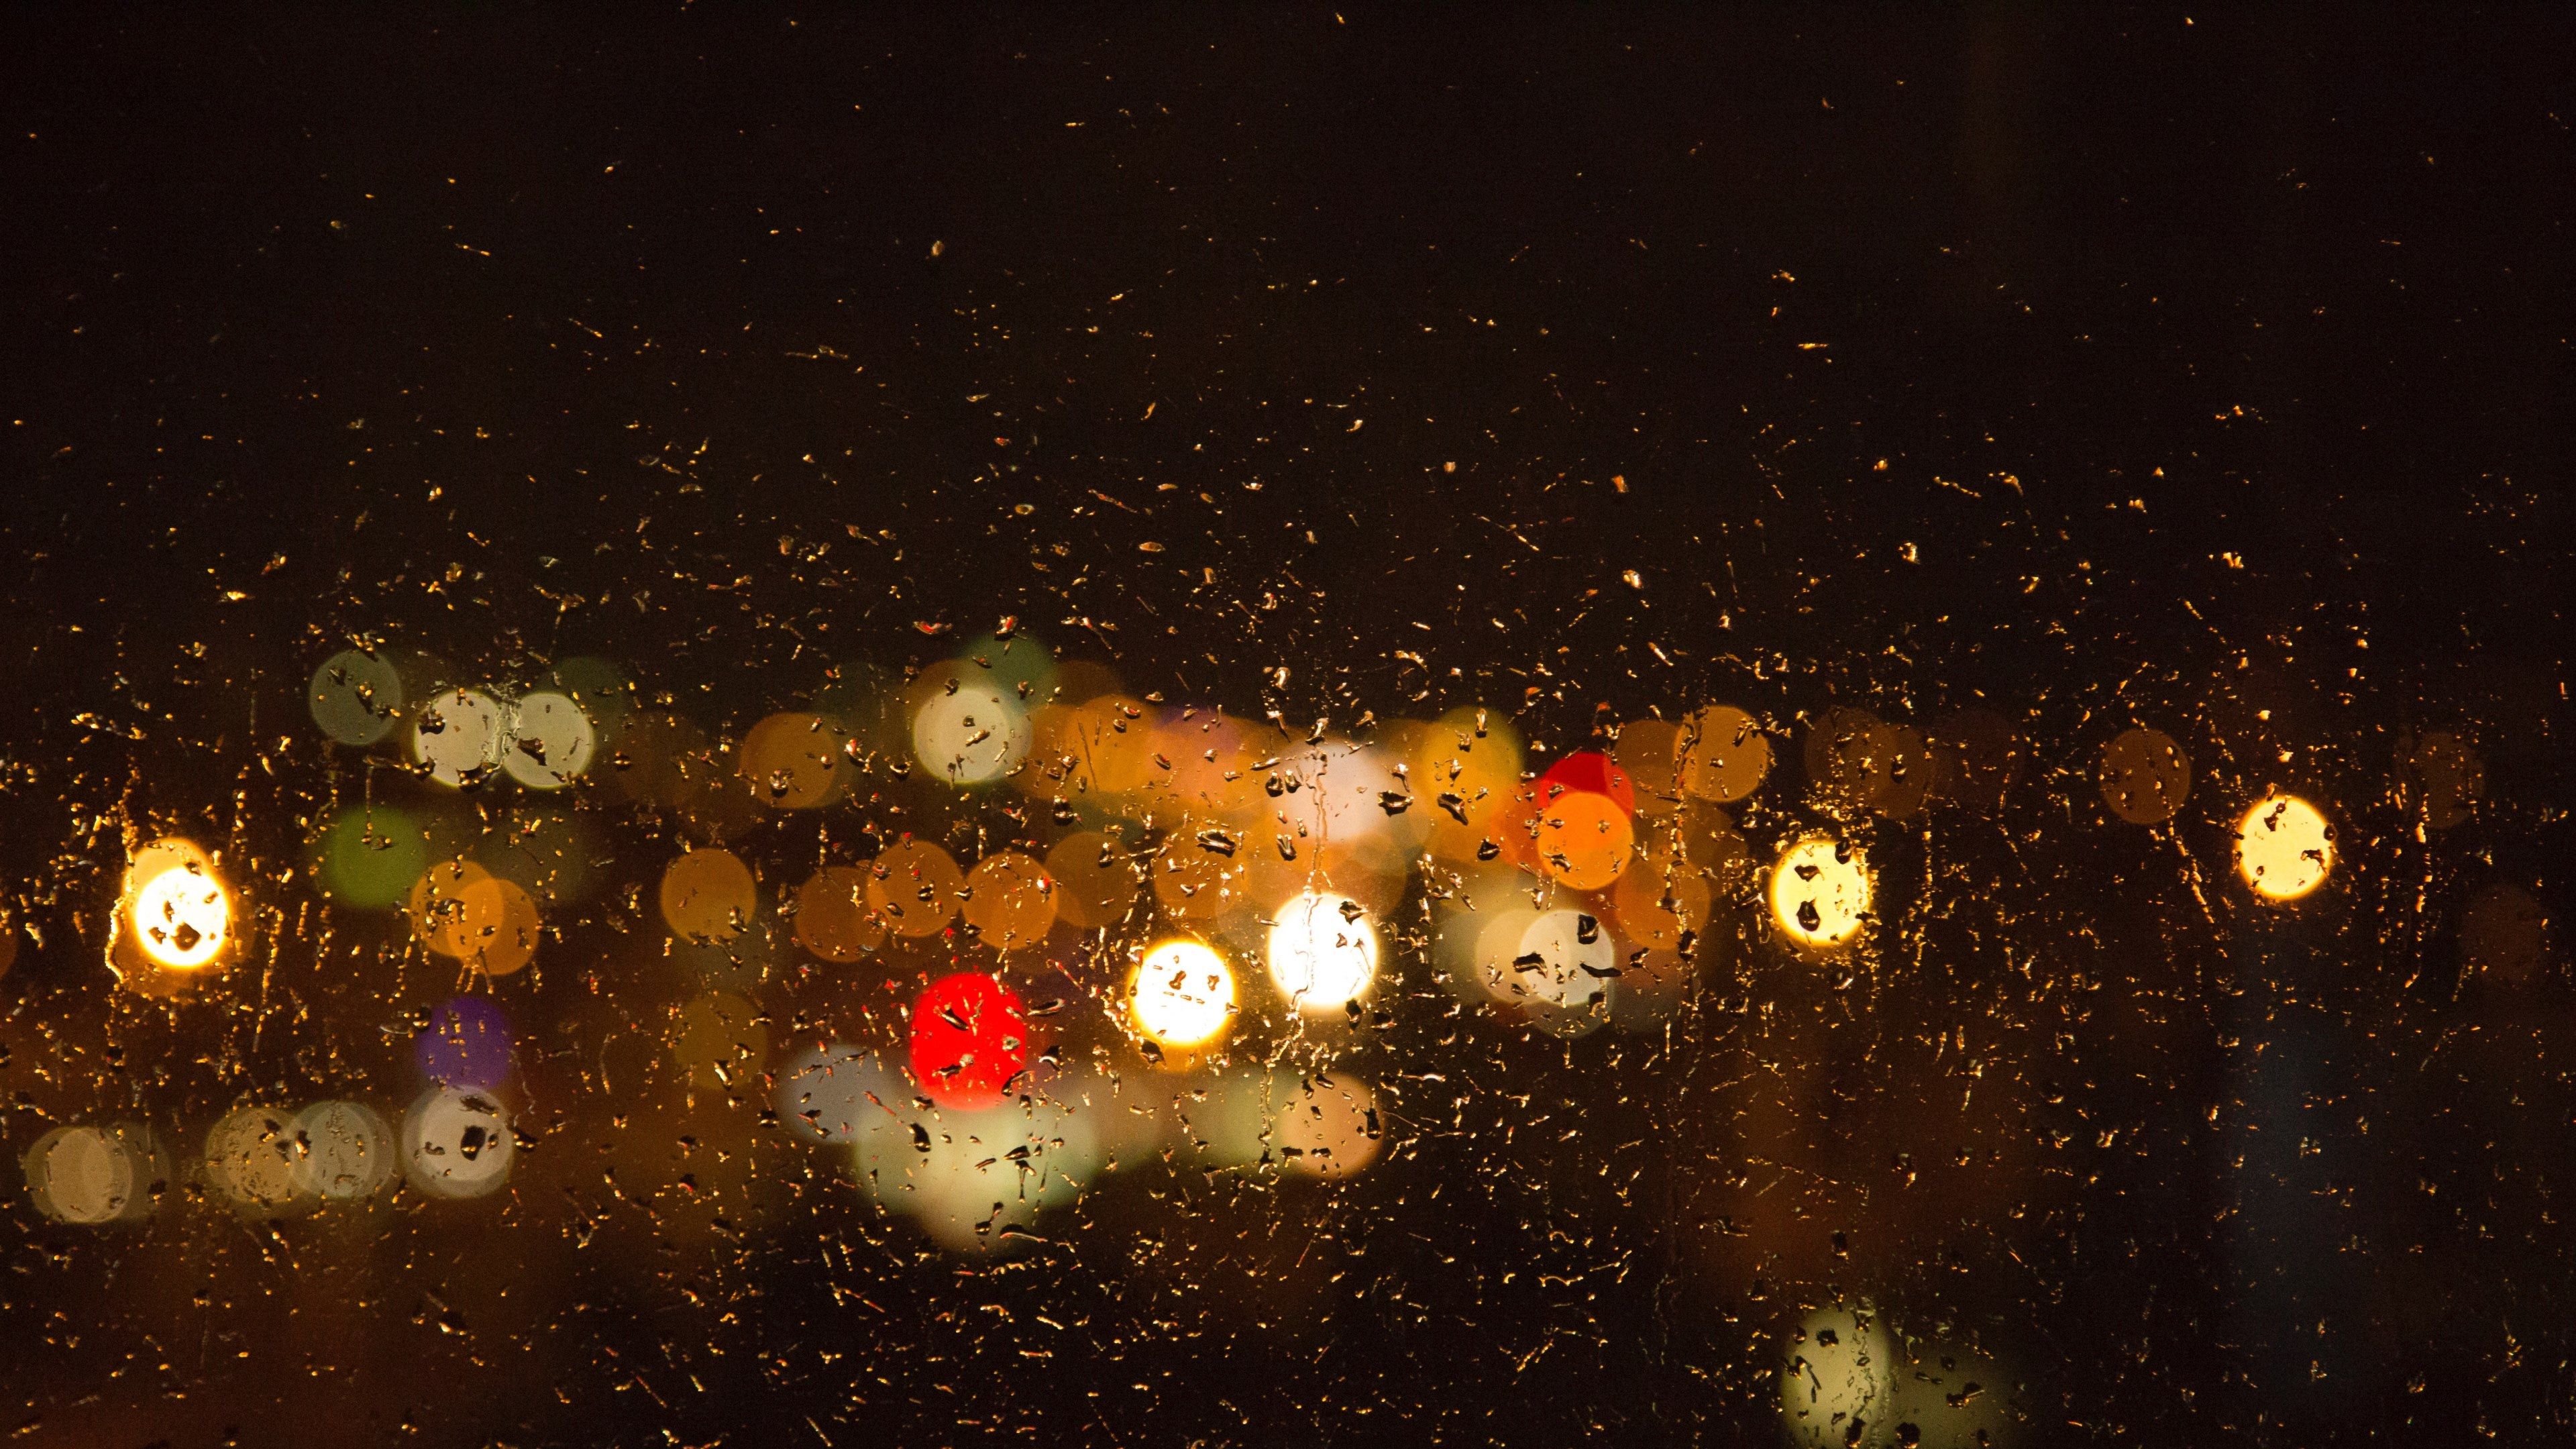 Raindrops on a window with blurred lights in the background - Blurry